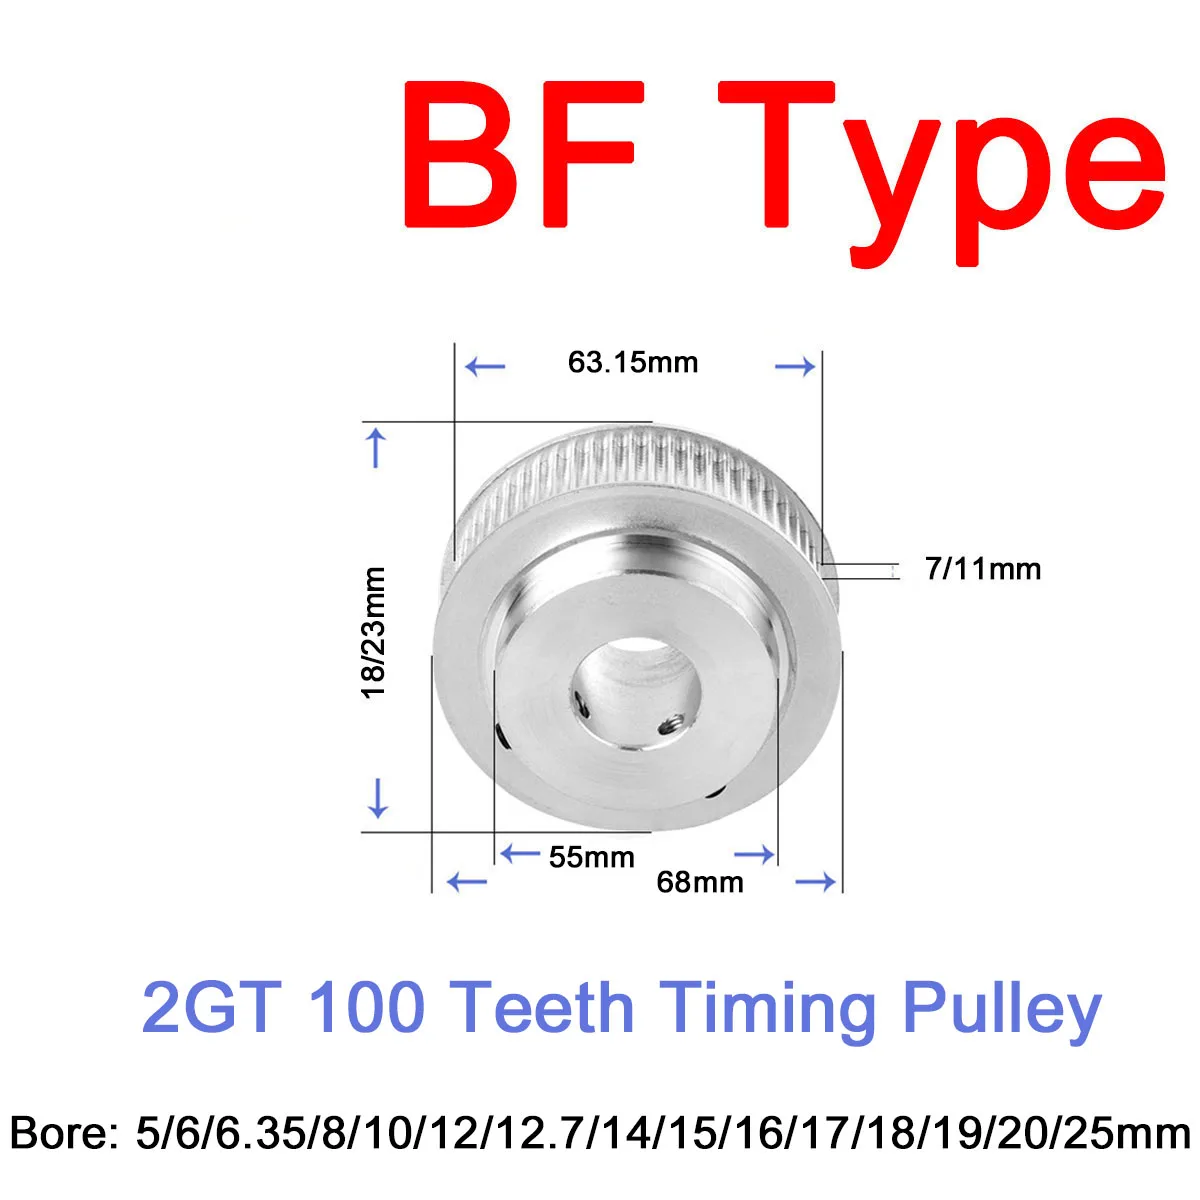 

1Pc 100 Teeth 2GT BF Type Synchronous Wheel Idler Timing Pulley Bore 5/6/6.35/8/10/12/12.7/14/15/16/17/18/19/20mm Width 7/11mm